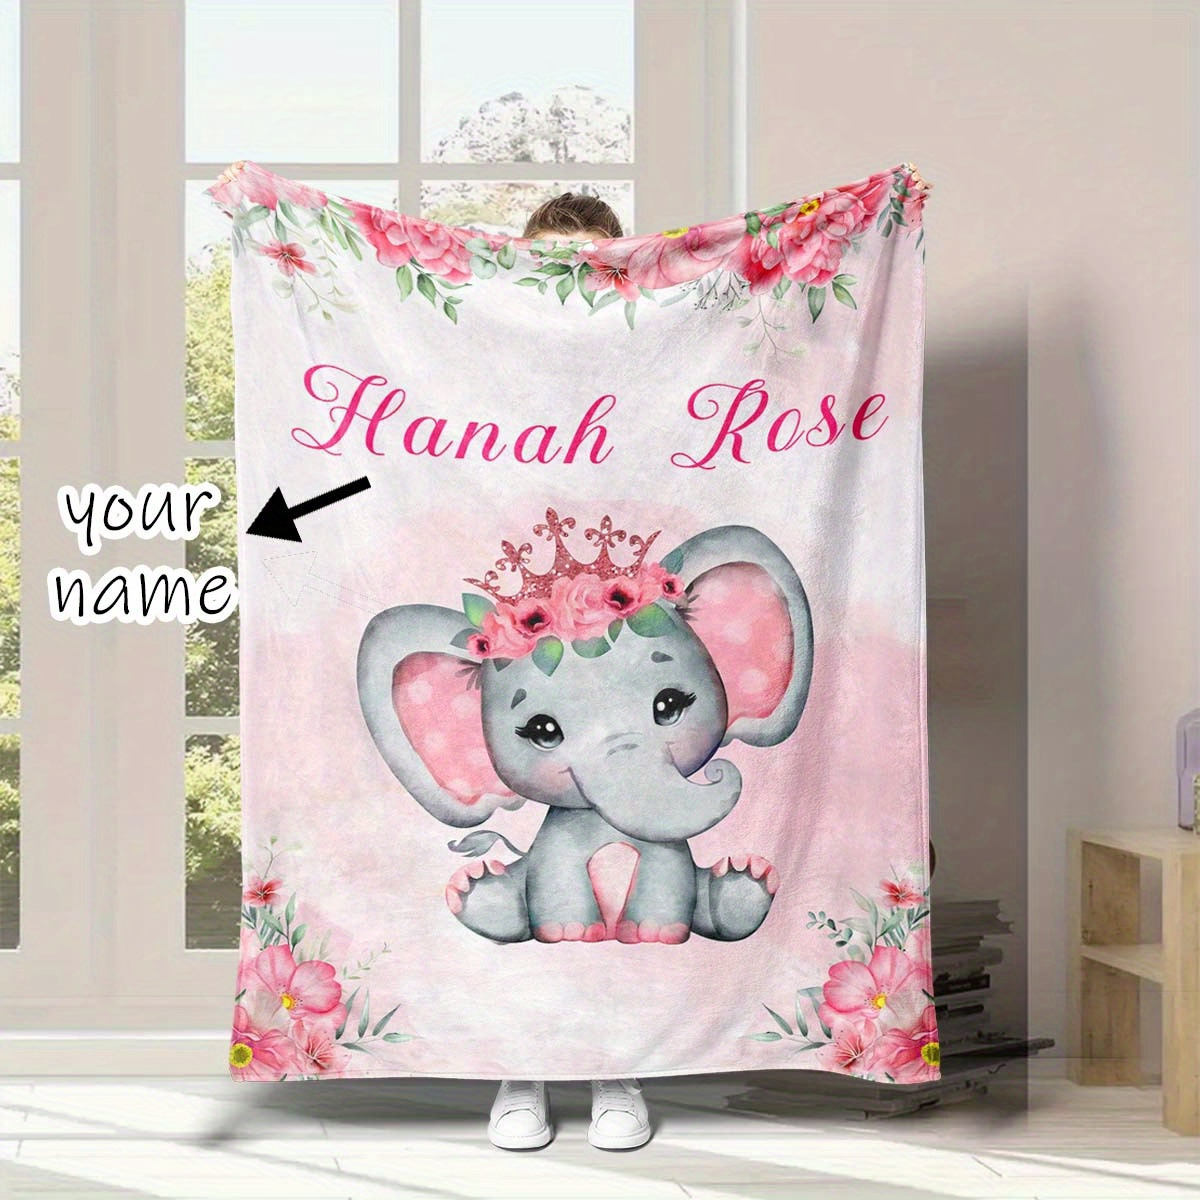 

Customizable Cute Smiling Elephant With Pink Crown & Floral Border Flannel Blanket - Soft, All-season Comfort For Camping, Birthday, Holiday Gifts - Machine Washable